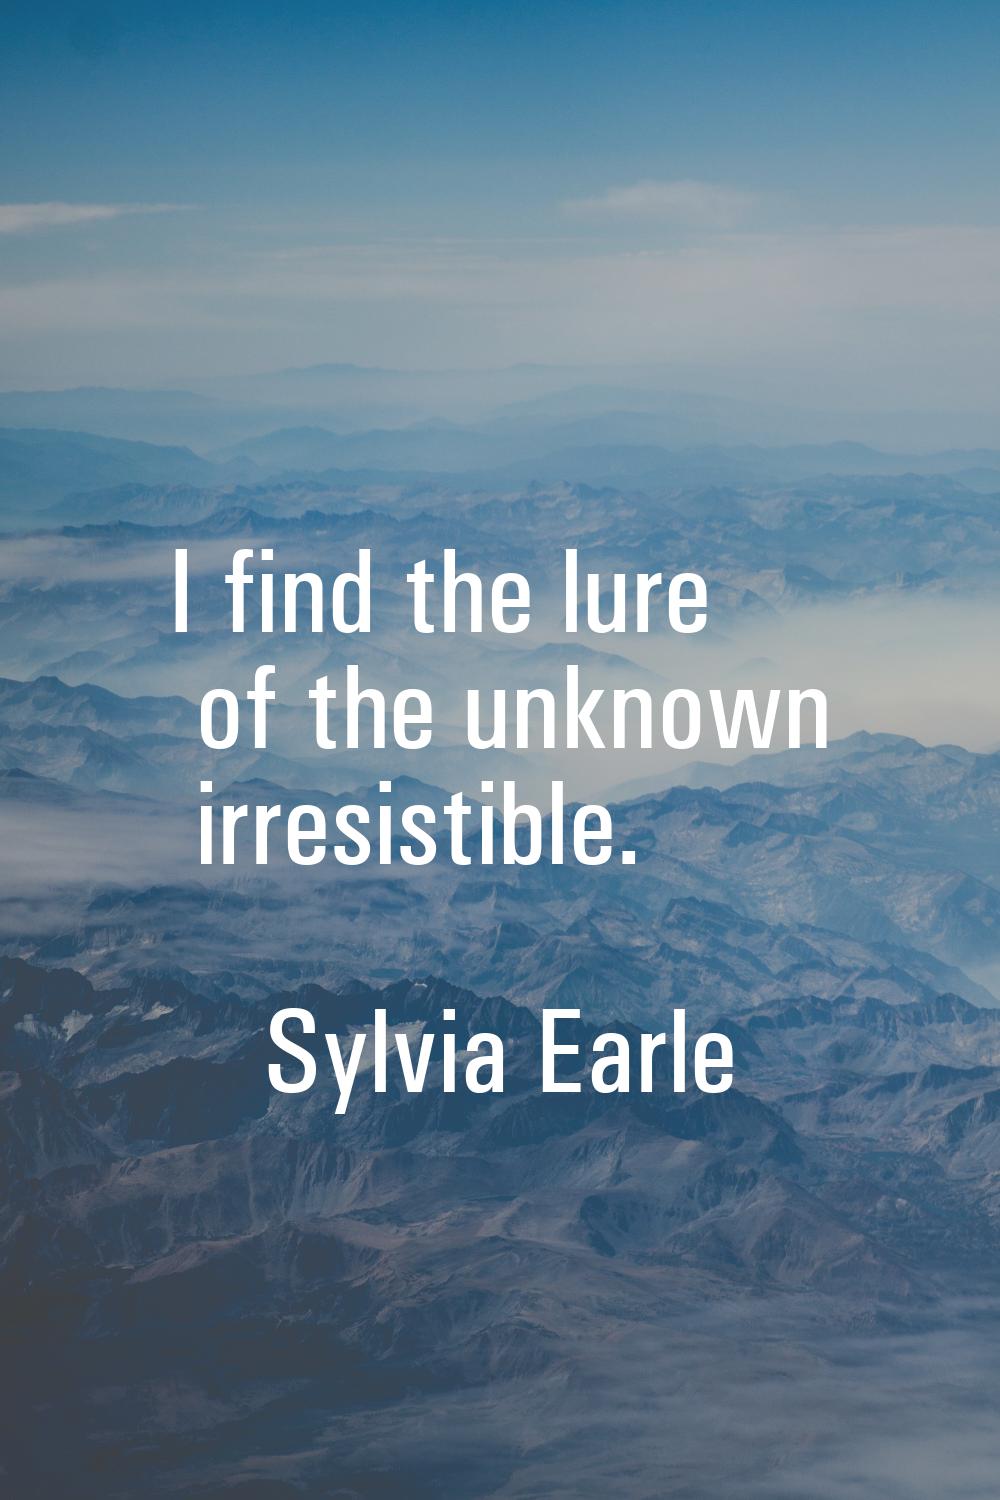 I find the lure of the unknown irresistible.